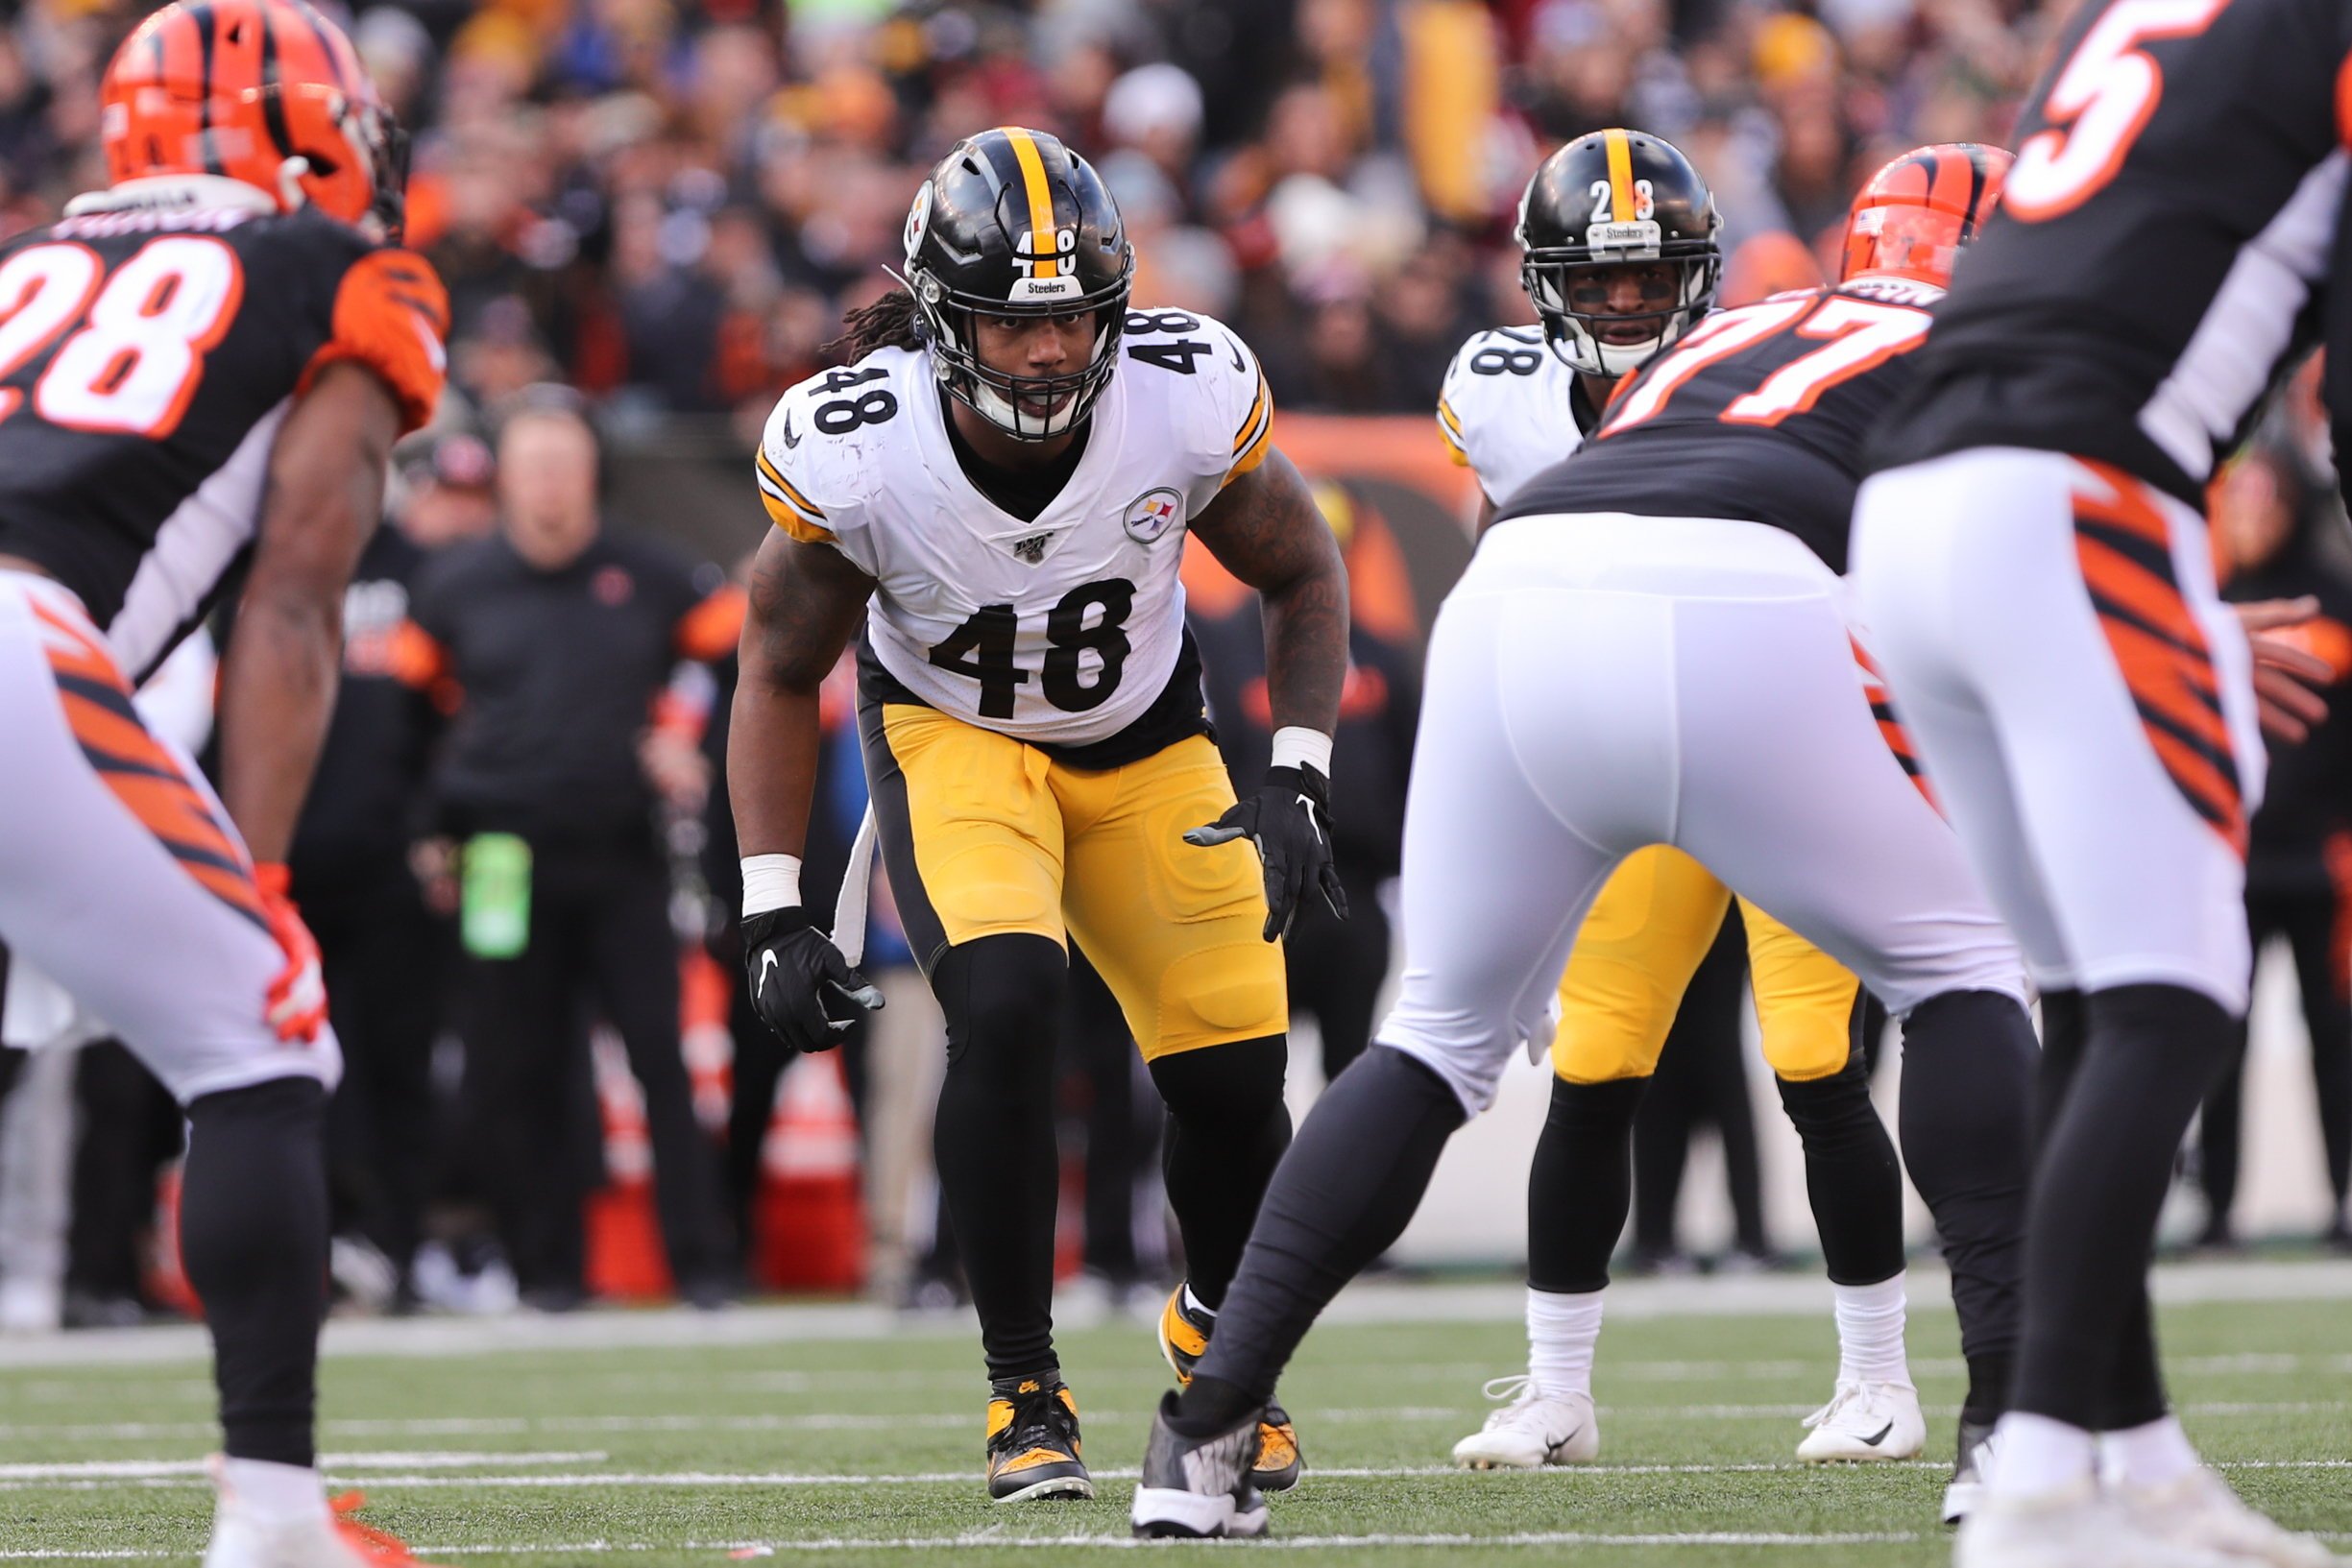 CINCINNATI, OH - NOVEMBER 24: Pittsburgh Steelers outside linebacker Bud Dupree (48) in action during the game against t